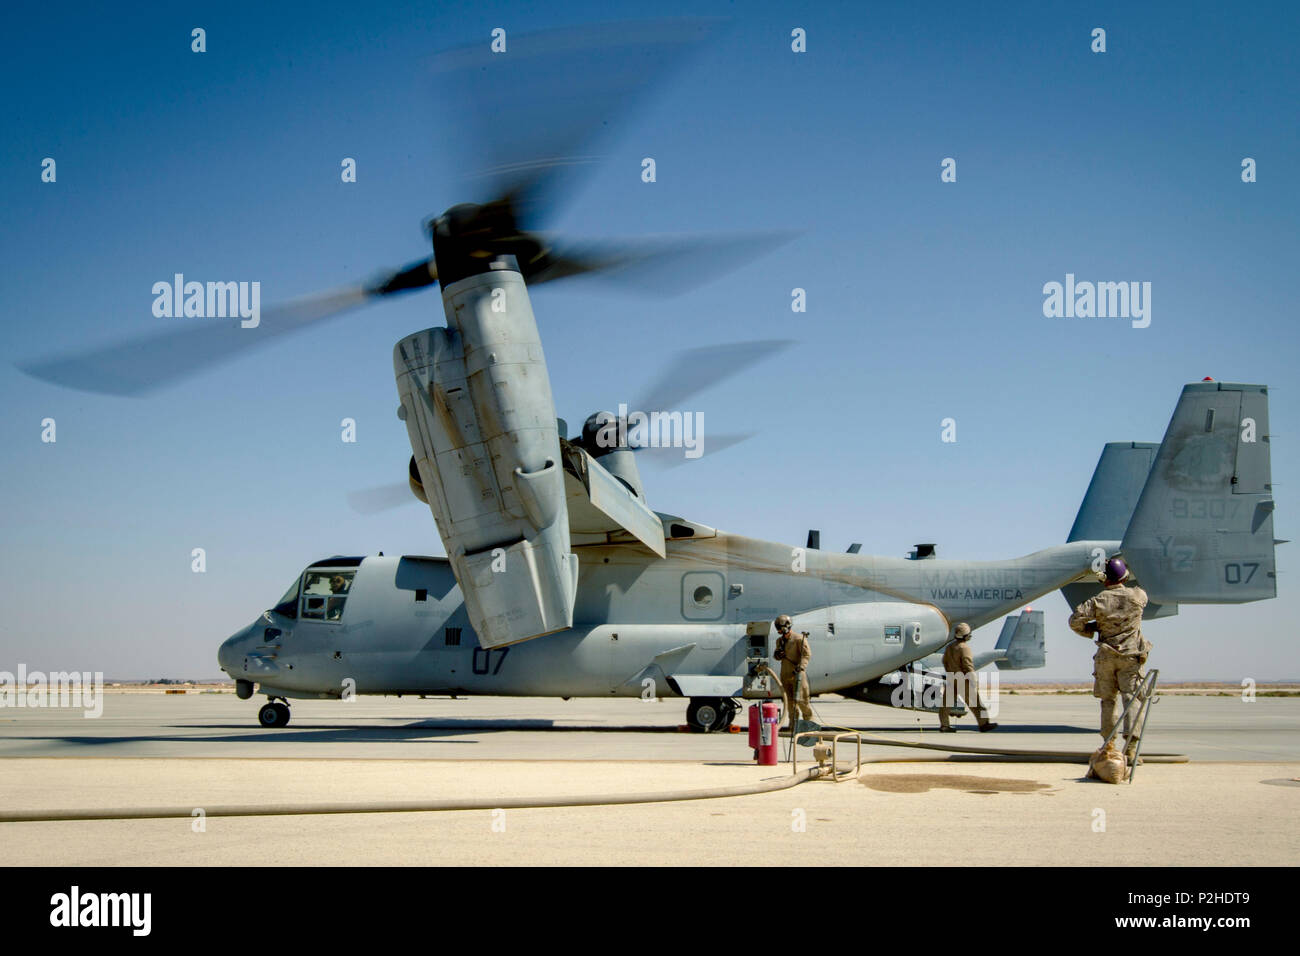 U.S. Marines with Marine Wing Support Squadron 373, Special Purpose Marine Air-Ground Task Force - Crisis Response - Central Command, fuel an MV-22 Osprey at a forward arming and refueling point during a Mission Rehearsal Exercise at a base in southern Jordan, Sept. 10, 2016. The MRX is a collective training event where the MAGTF elements collaborate to refine individual and cooperative capabilities. U.S. Marines and Sailors assigned to Special Purpose Marine Air-Ground Task Force-Crisis Response-Central Command support operations, contingencies and security cooperation in Marine Corps Forces  Stock Photo